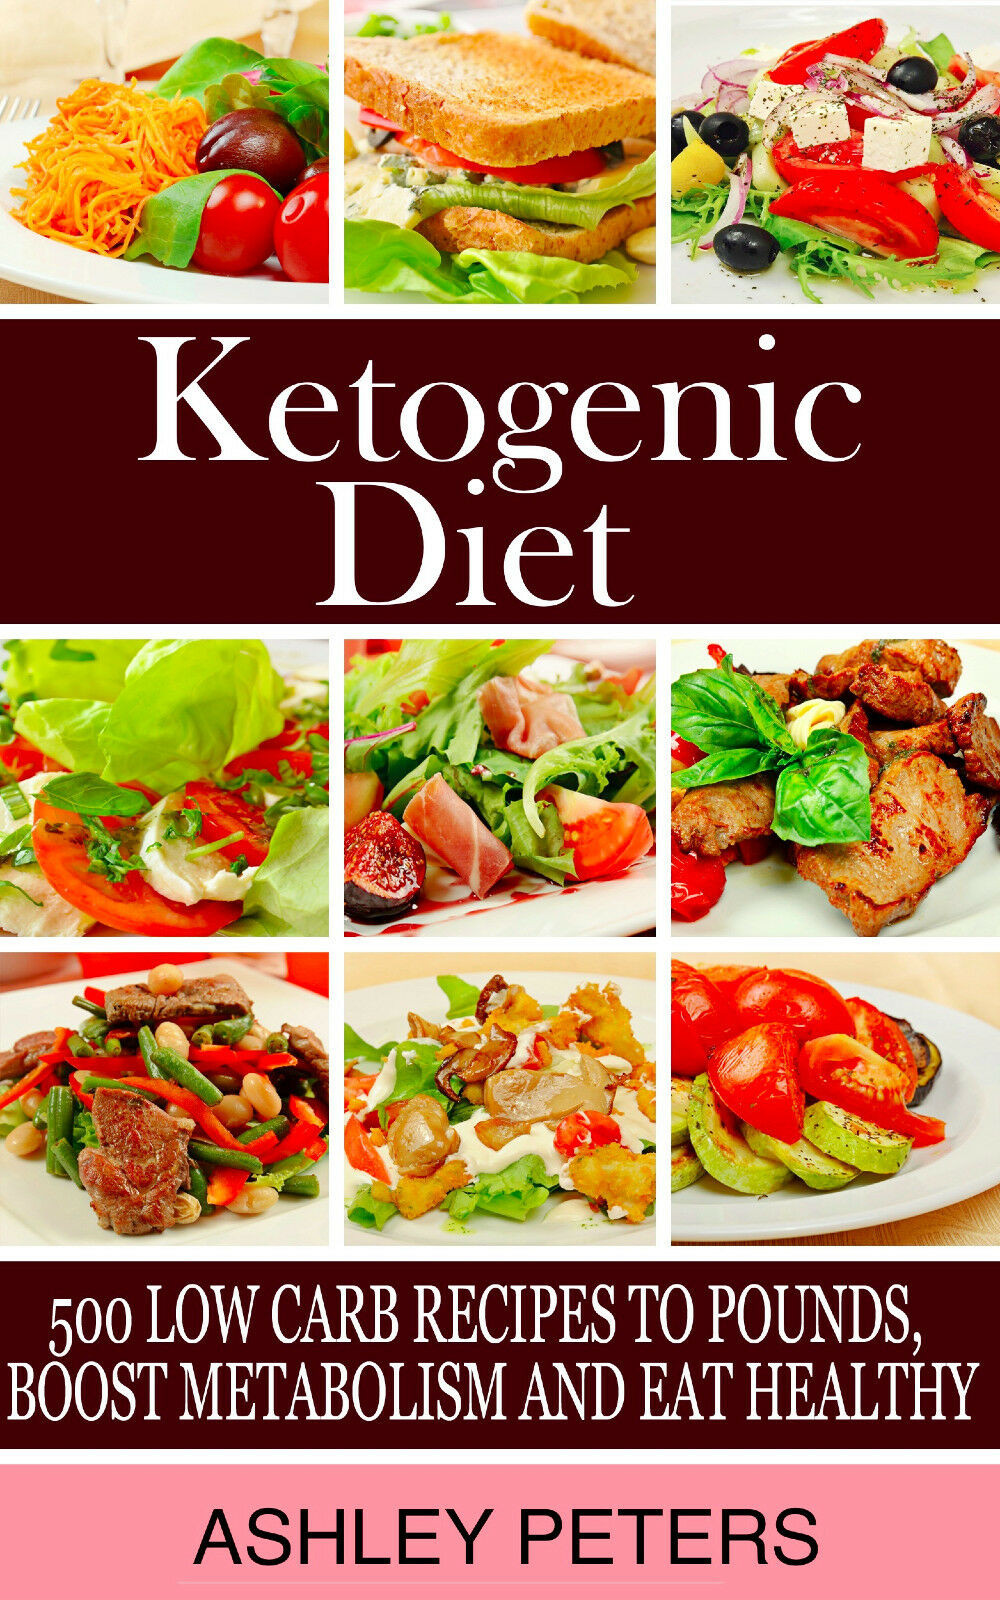 Healthy Keto Recipes Ketogenic Diet
 Ketogenic Diet Cookbook 500 Keto Diet Low Carb Recipes